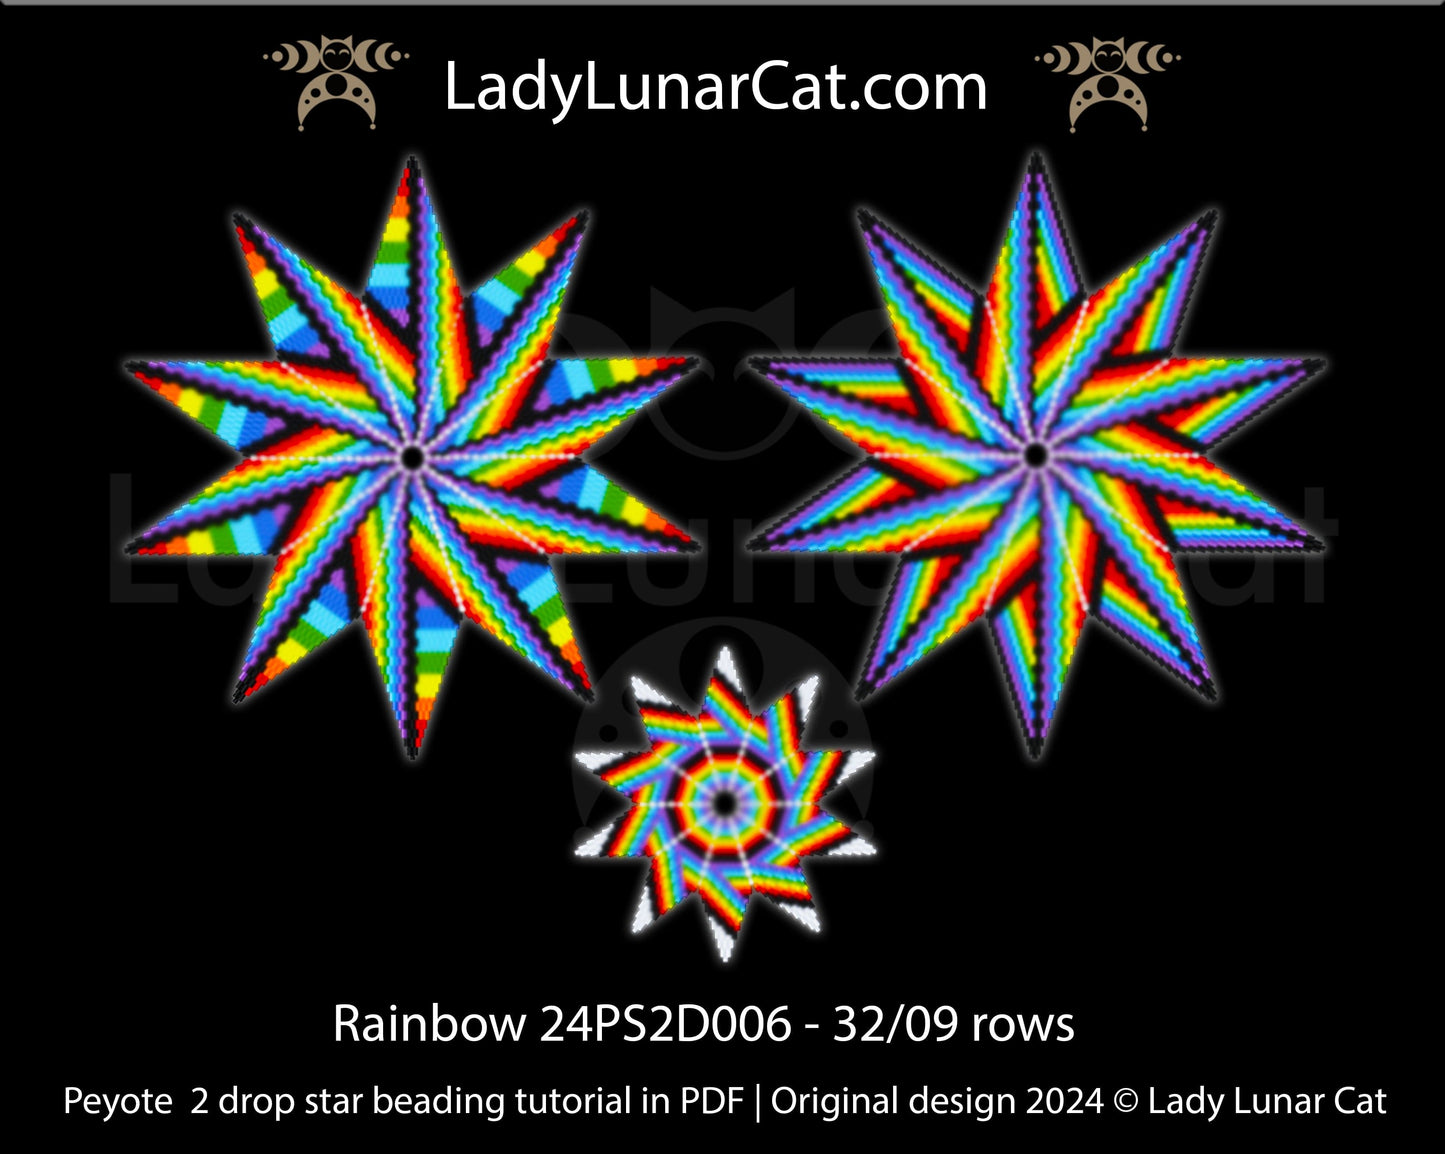 Copy of Peyote 2 drop star pattern for beading - Magic forest  64/17 rows and 32/ 9 rows LadyLunarCat